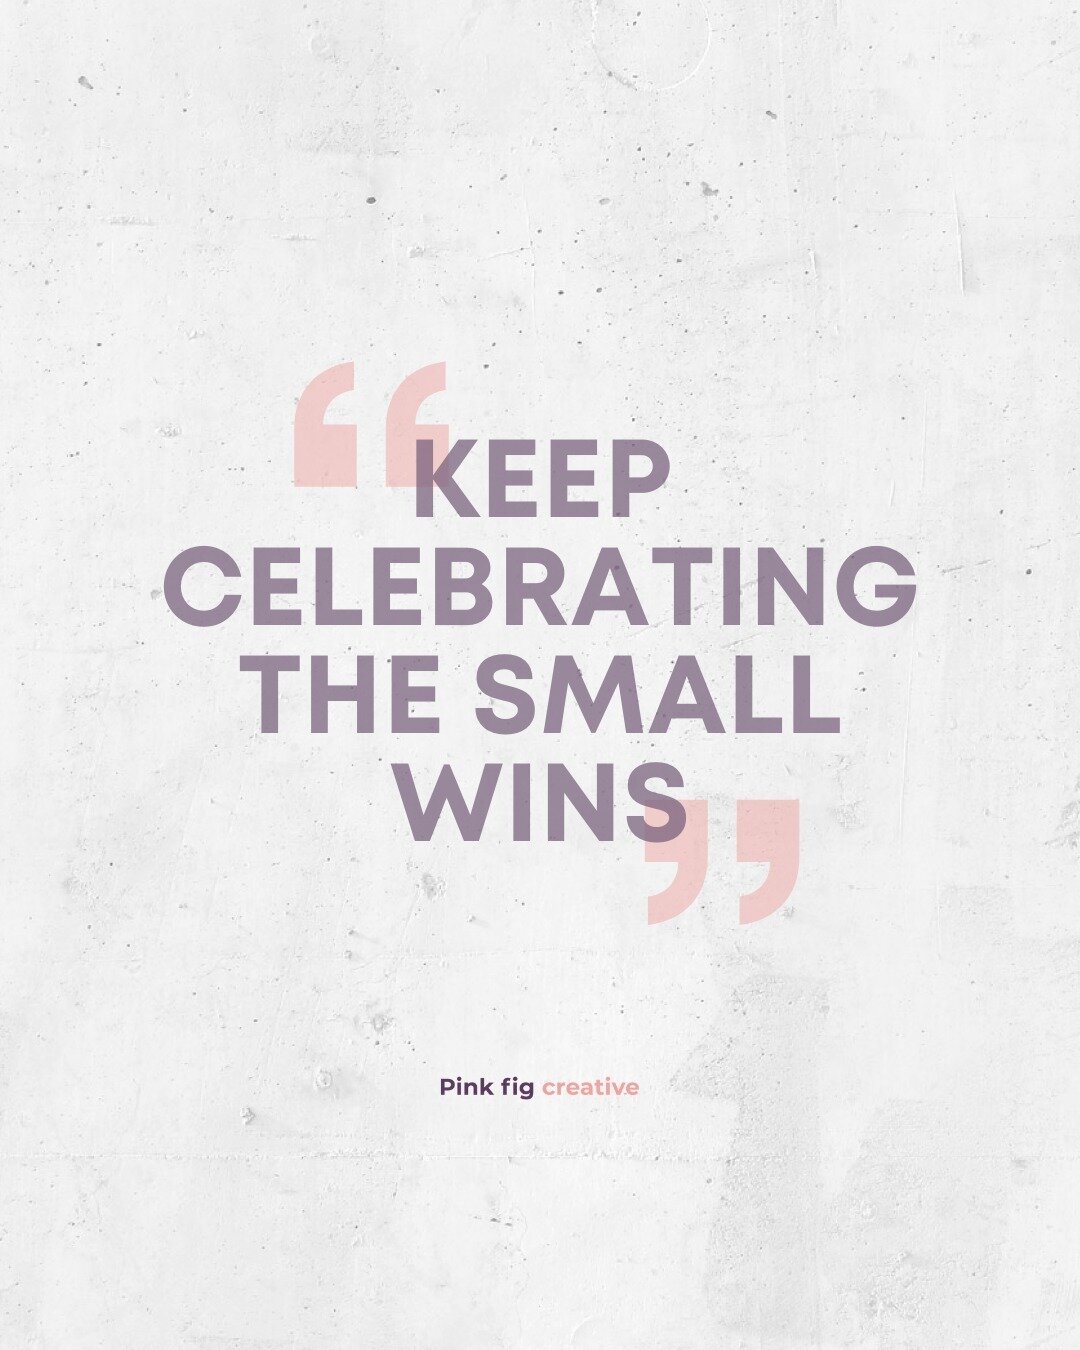 Here's to the small wins that keep us going. Every bit of progress, no matter how minor it seems, moves us closer to our goals. Remember, the journey is made up of these moments. How did you move forward today?⁠
.⁠
.⁠
.⁠
⁠
#webdesign #websitedesign #